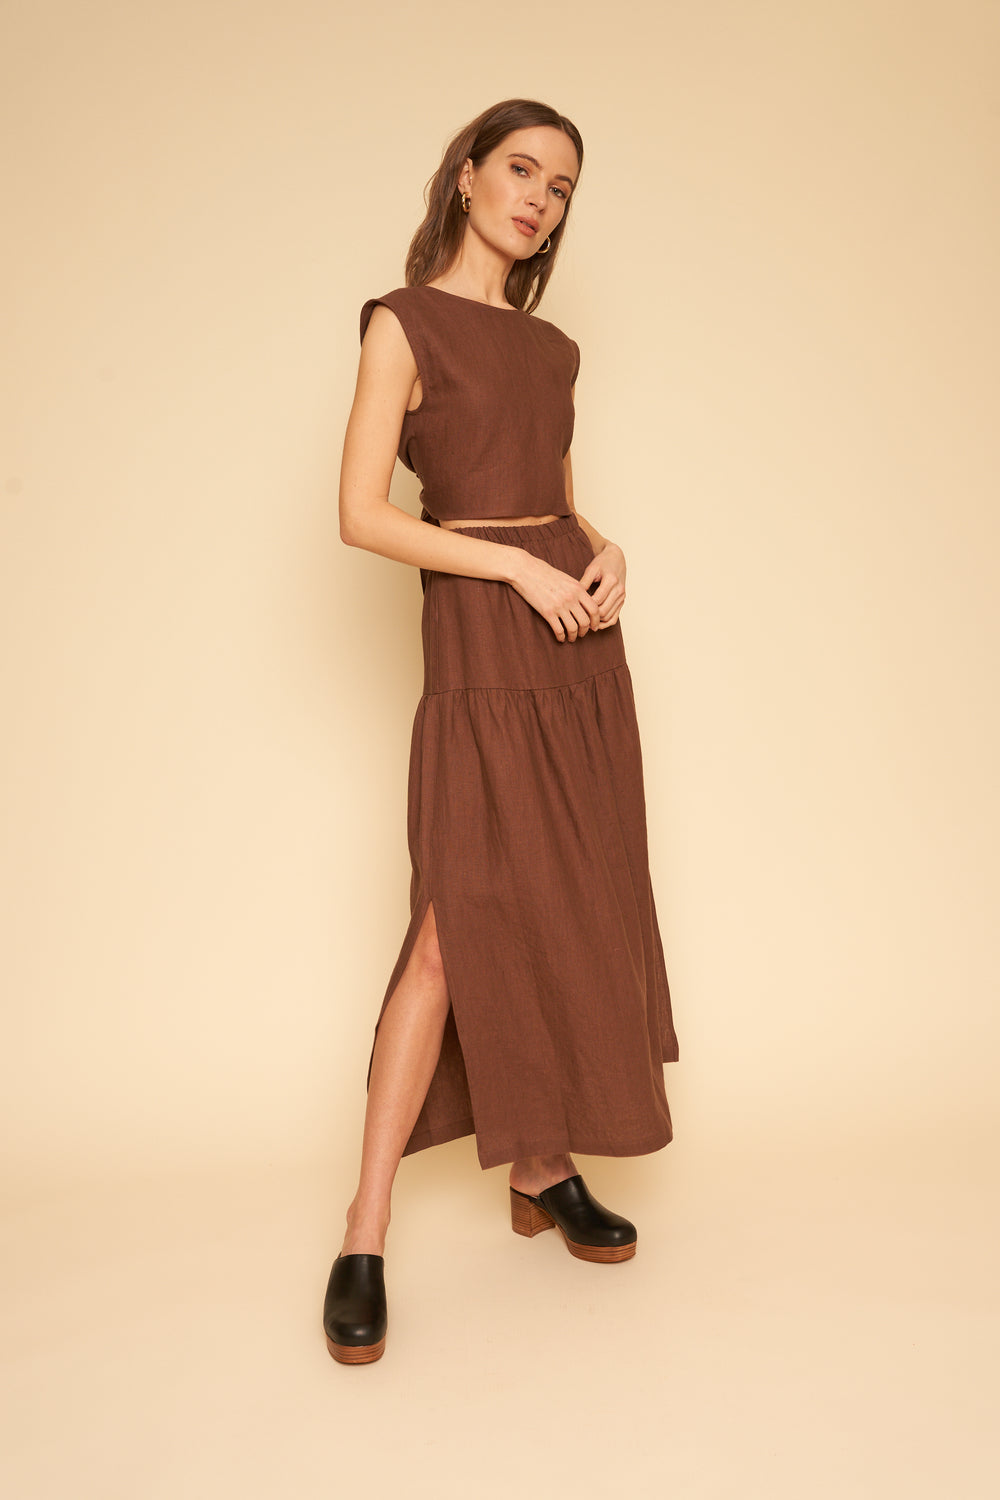 Millie Skirt/Dress in Chocolate - Whimsy & Row